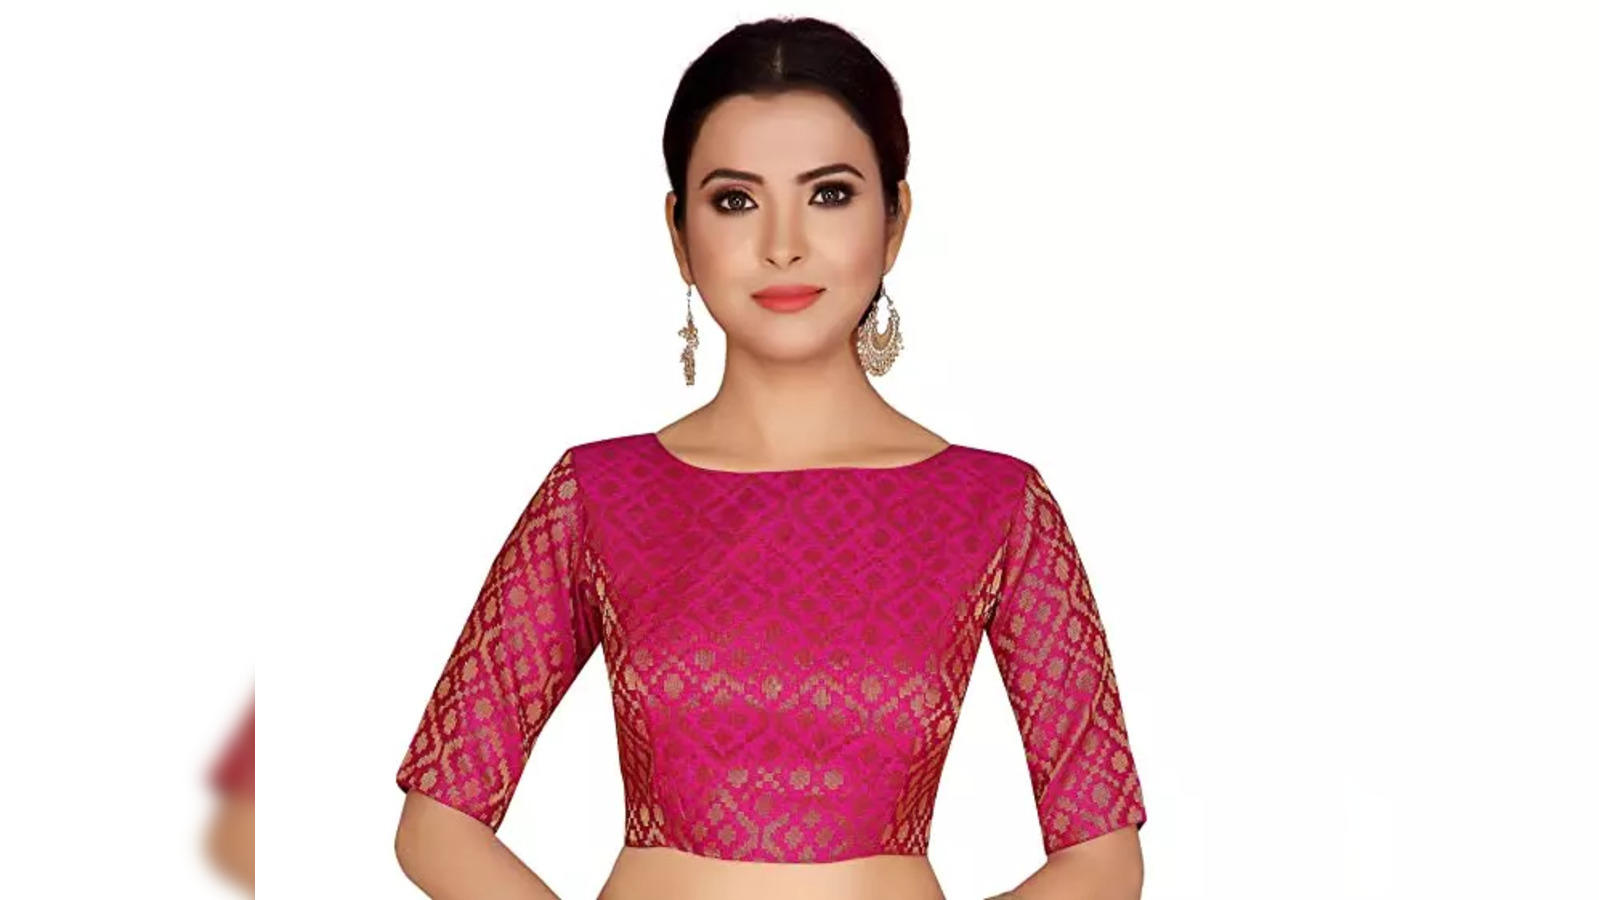 boat neck blouse: 10 best-selling Boat Neck Blouse for women staring at  just Rs.300 - The Economic Times